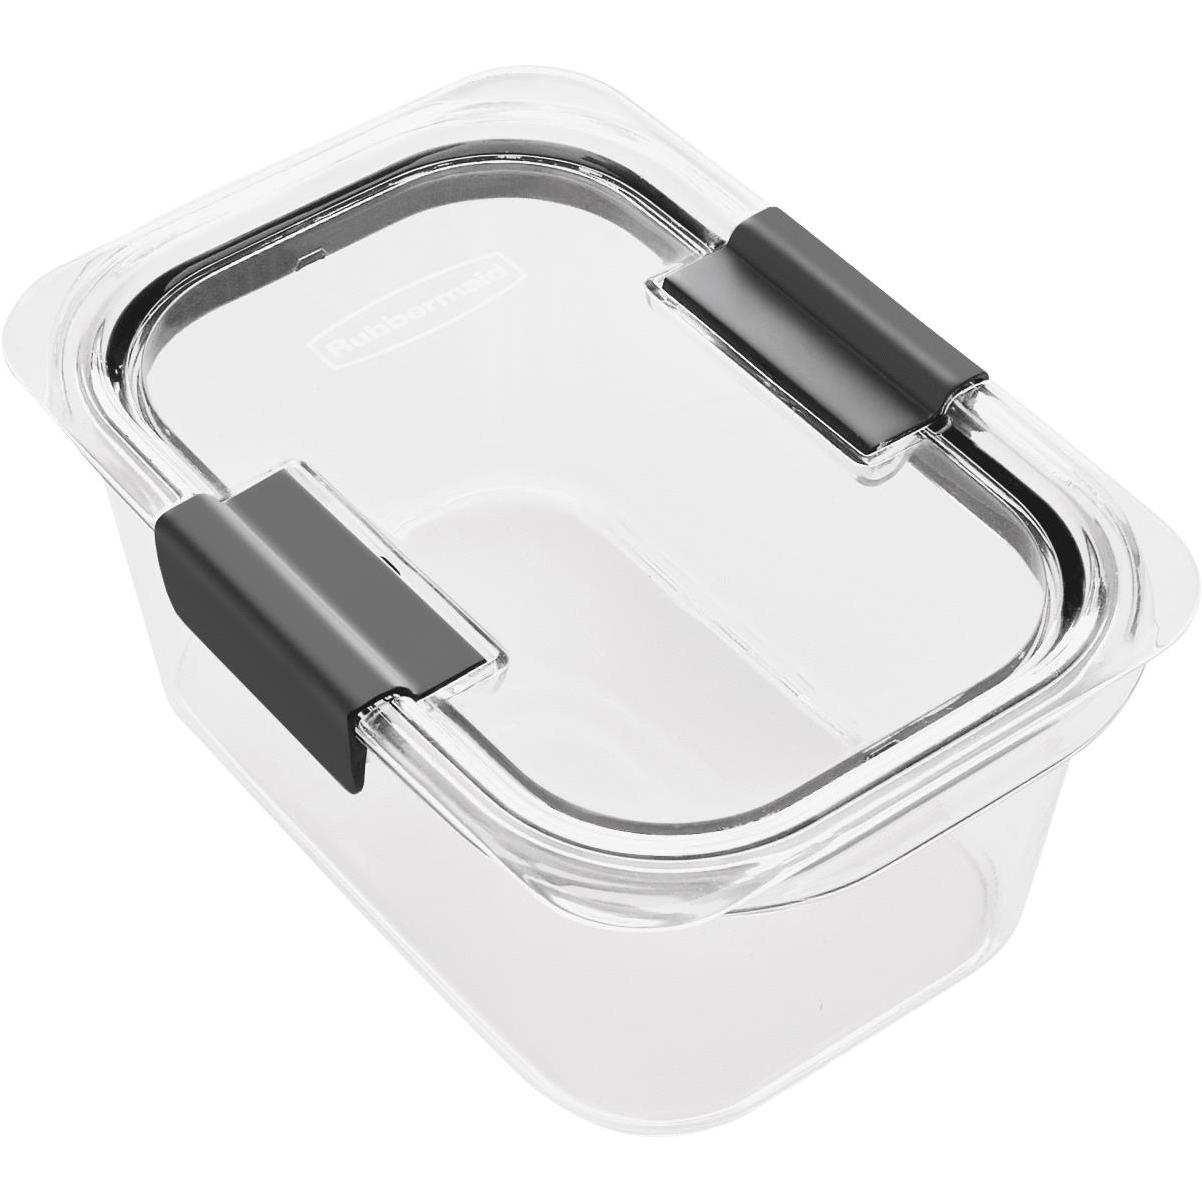 Rubbermaid Brilliance Food Storage Container, BPA free Plastic, Medium, 3.2  Cup, 5 Pack, Clear